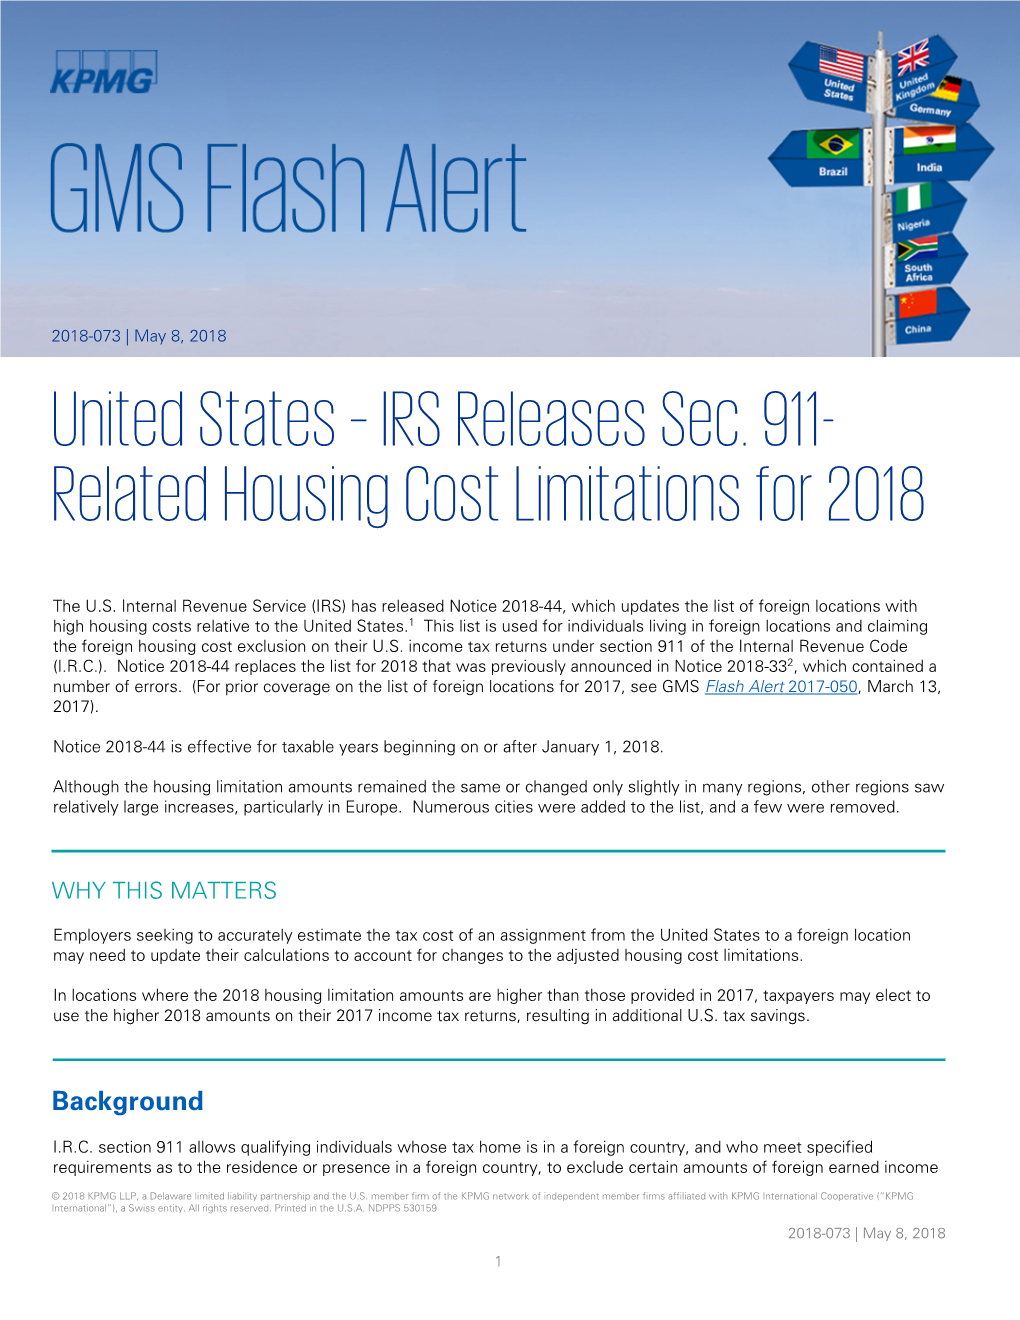 IRS Releases Sec. 911-Related Housing Cost Limitations for 2018